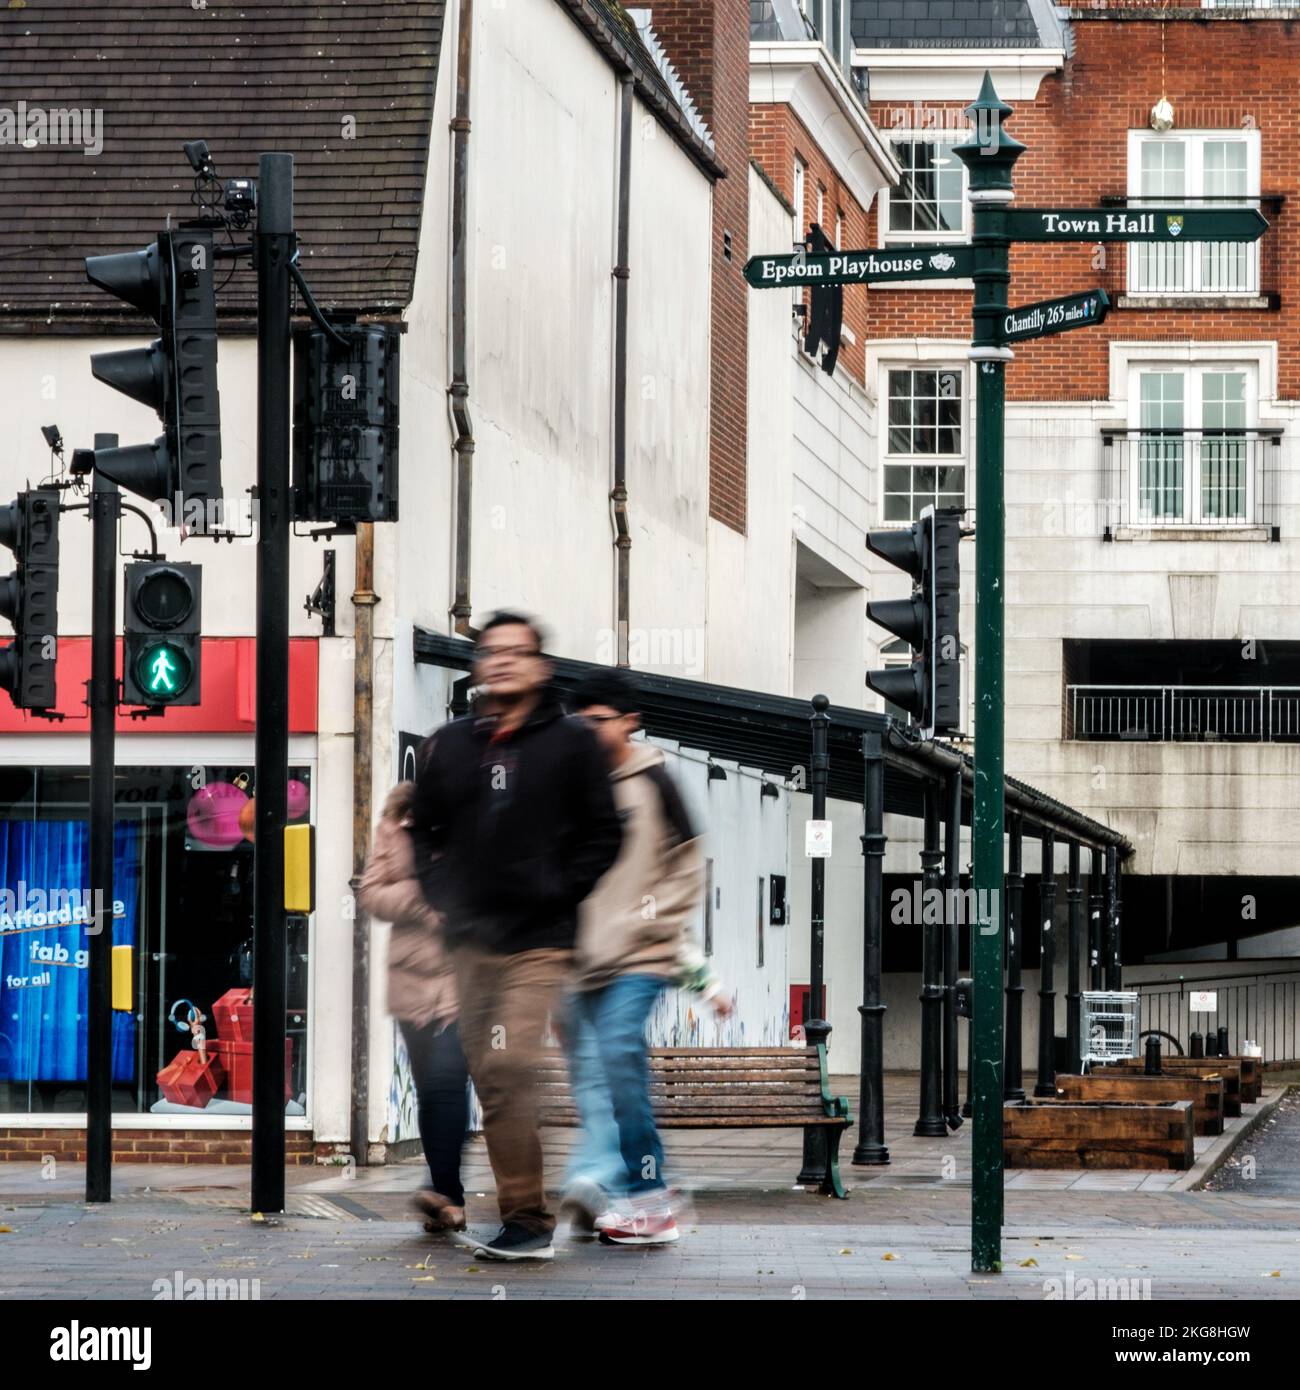 Epsom, Surrey, London UK, November 20 2022, Family Crossing Road Implying Motion And Movement With Blur And Abstract Effect Stock Photo